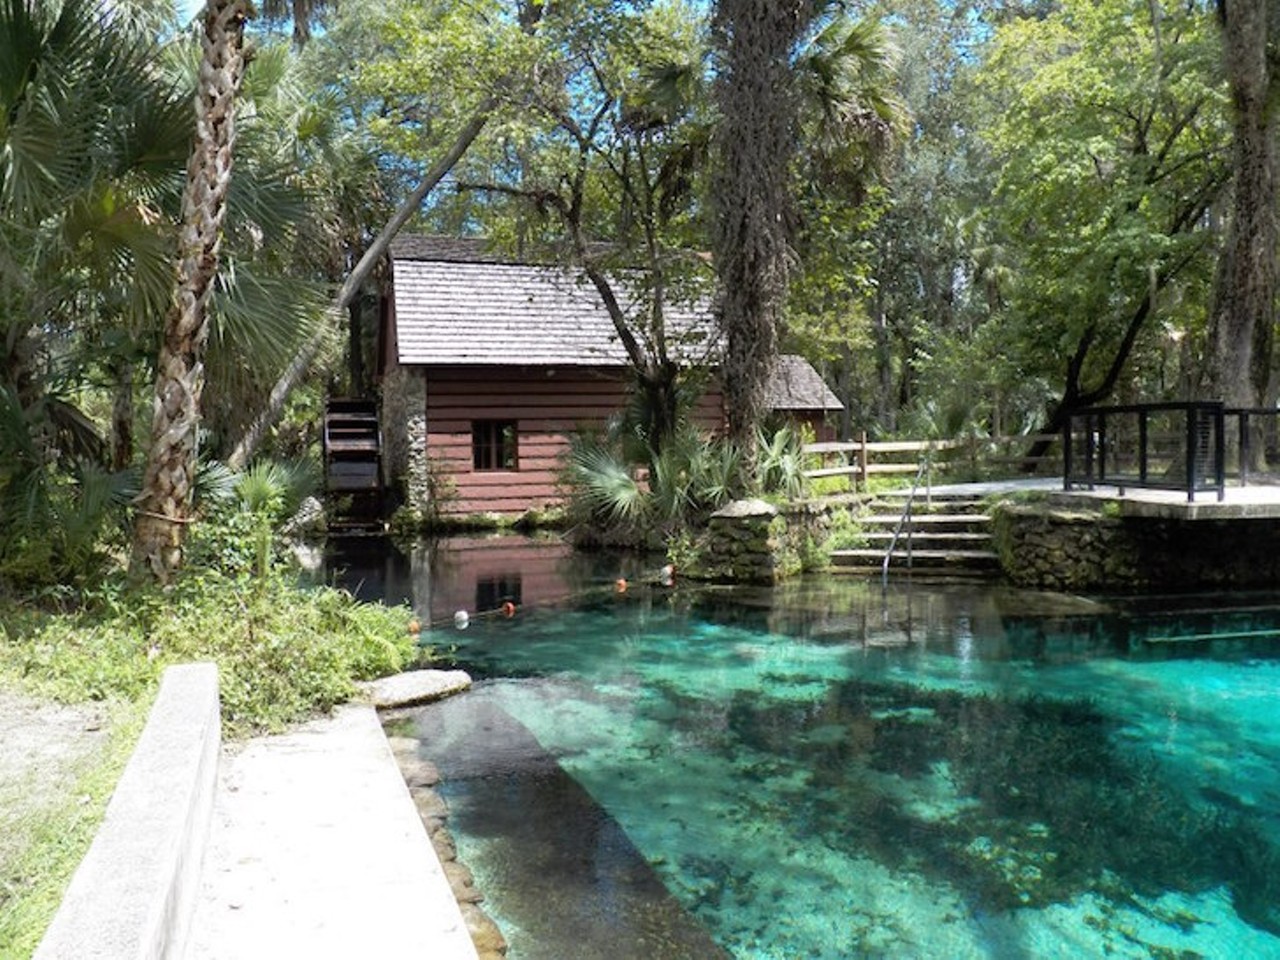 Juniper Springs Recreation Area
26701 E. Highway 40, Silver Springs,  (352) 625-3147, starting at $22 per night
One of the oldest spring parks on the East coast, Juniper is one of the best known recreation areas in Florida. Located between Ocala and Ormond beach the site offers swimming, hiking trails and campgrounds. No full hook-up sites are available, but all sites are shaded and equipped with a picnic table, grill, campfire ring, lantern post and space for tents. Other amenities include include hot showers, flush toilets, a dump station and a convenience store with camping supplies.
Photo via Juniper Springs Recreation Area/Facebook